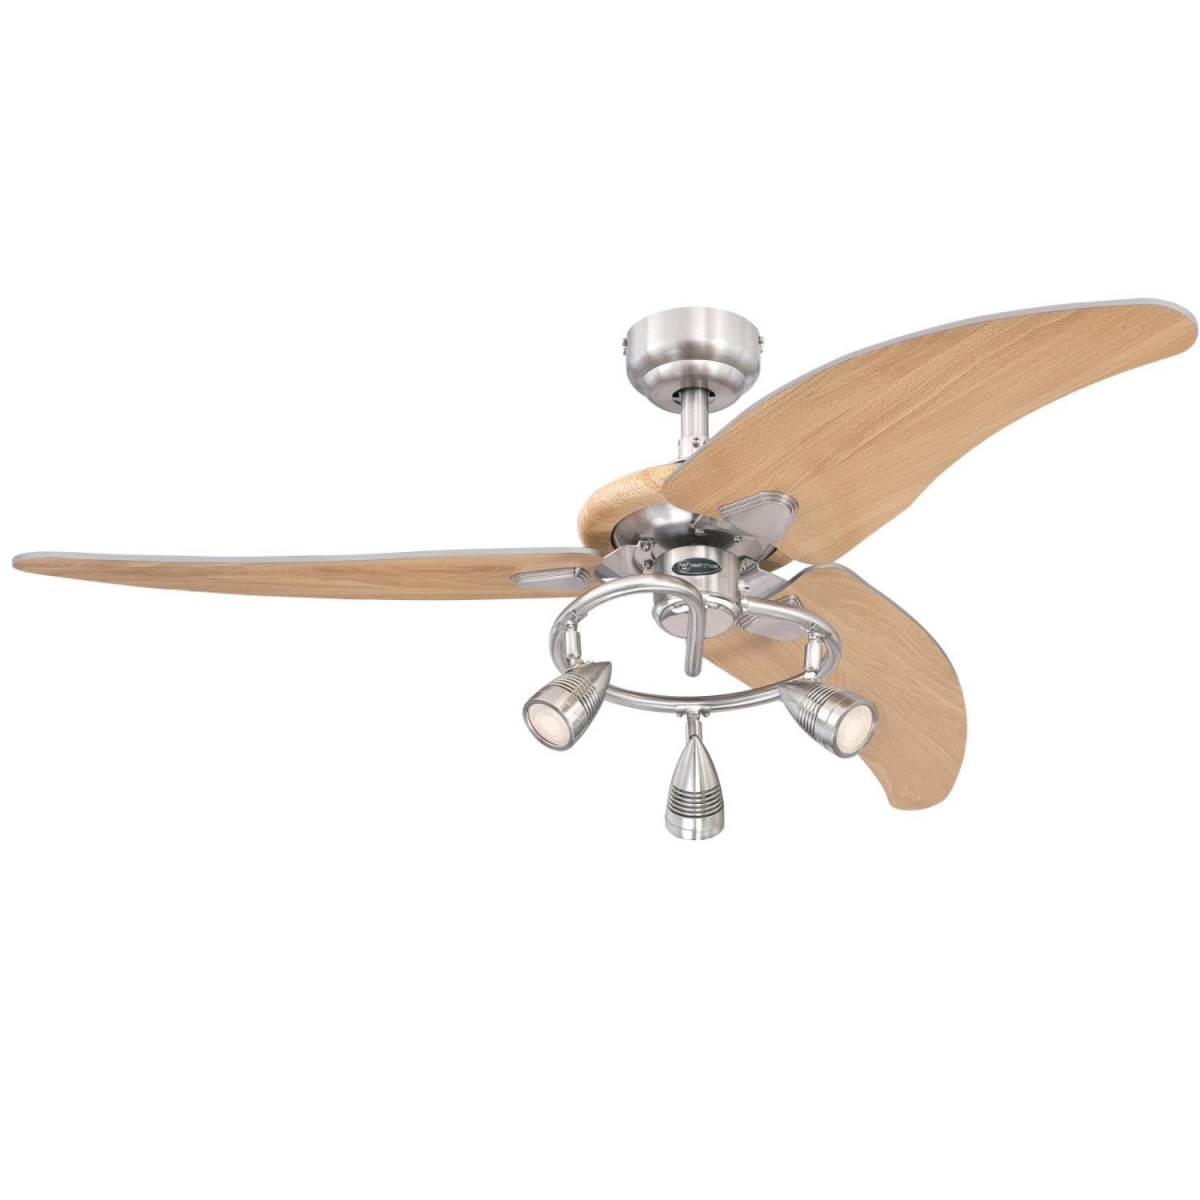 Picture of Westinghouse 7235700 48 in. Ceiling Fan with Dimmable LED Light Fixture Brushed Nickel Finish Beech Blades Brushed Nickel Spot Lights